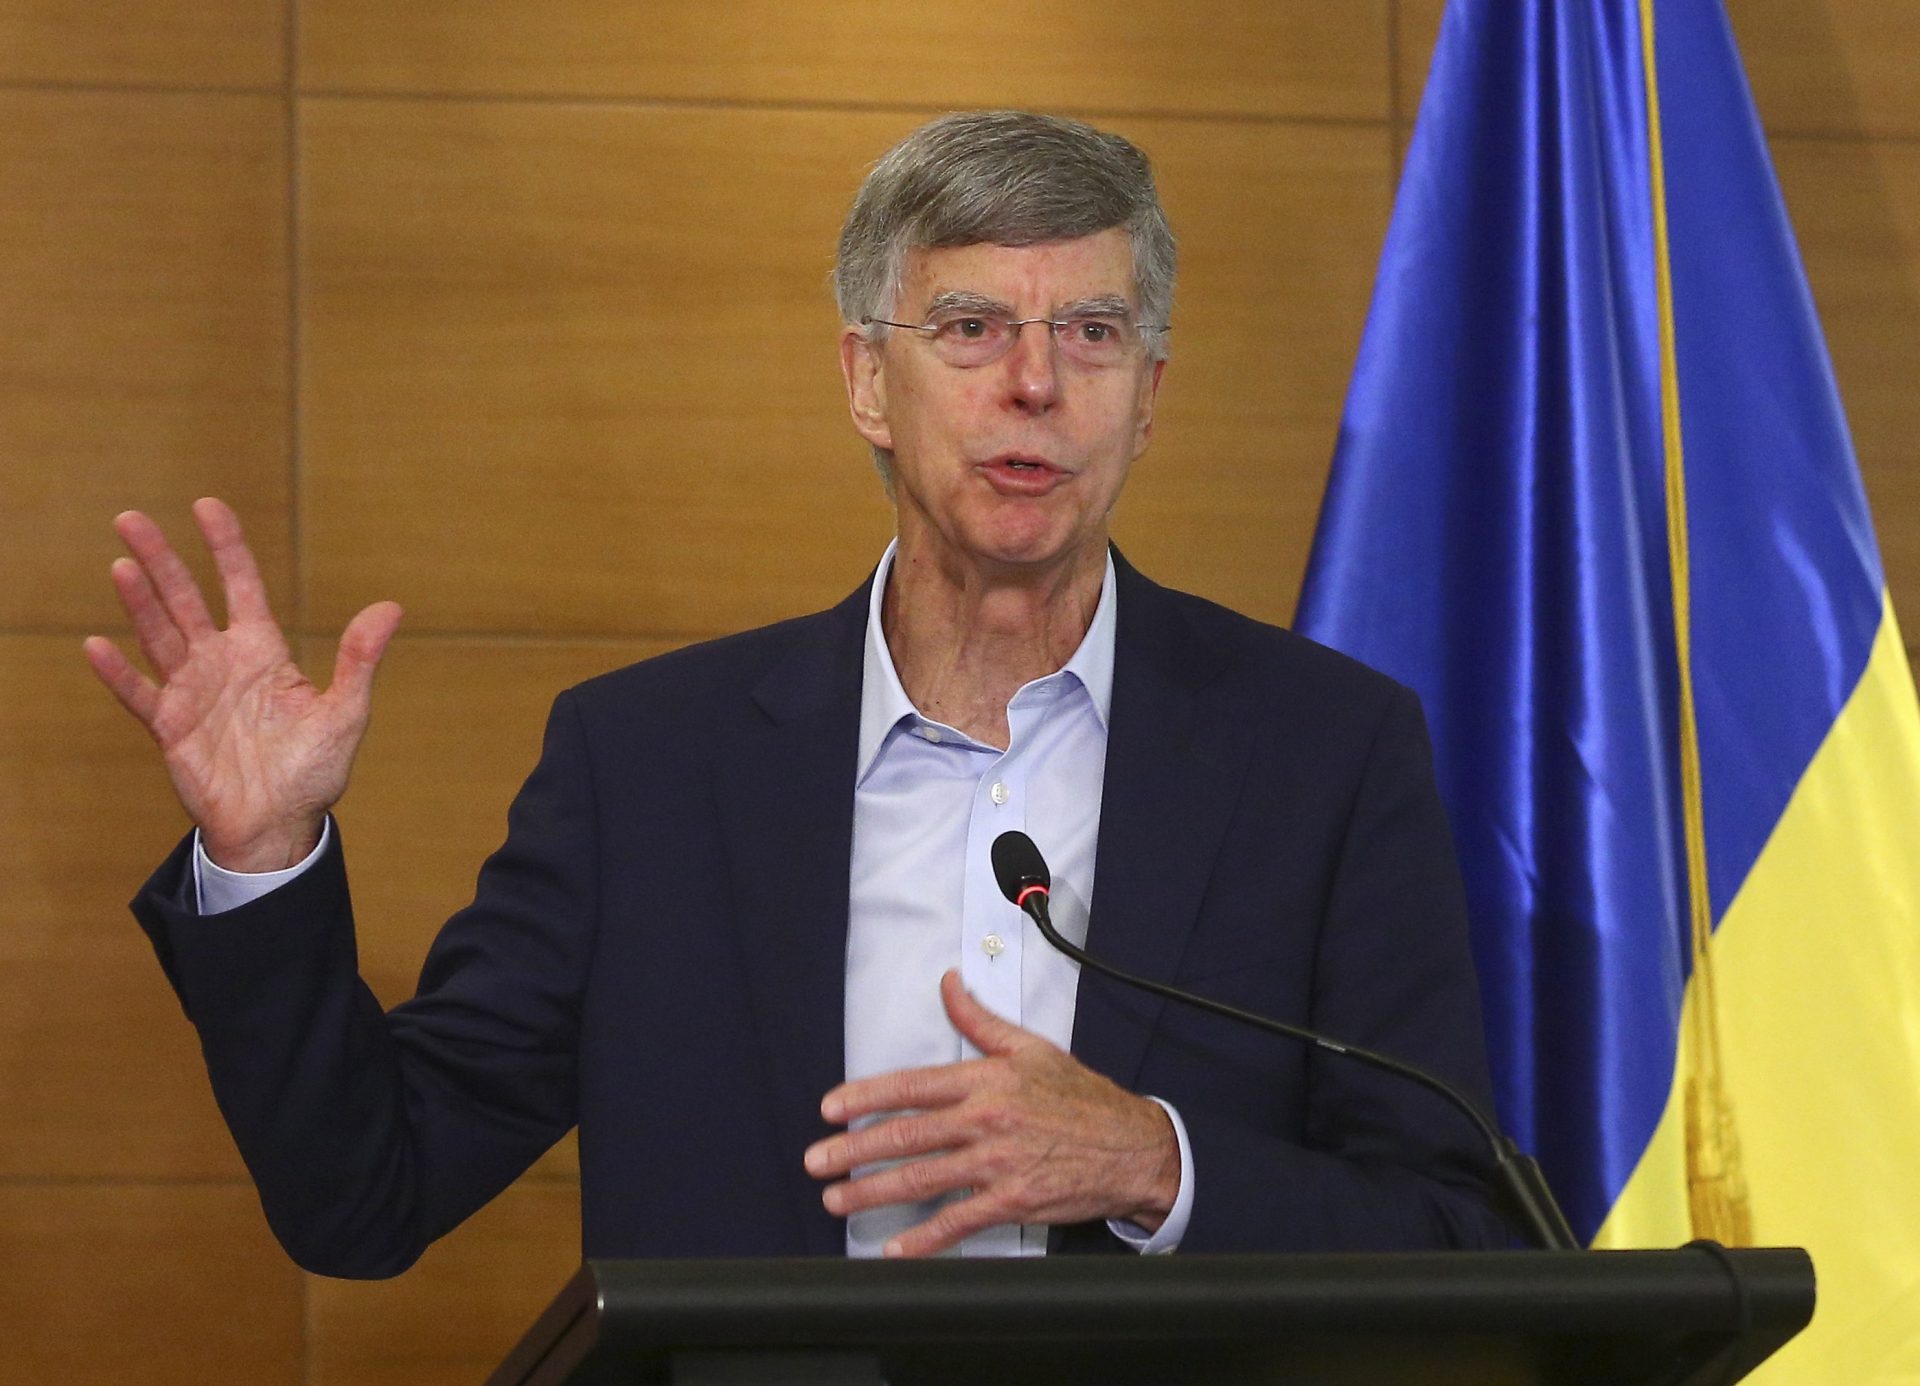 In this file photo taken on July 27, 2019, US Ambassador in Ukraine William Taylor speaks during a briefing in Kyiv, Ukraine. William Taylor, the top American diplomat in Ukraine, is set to appear Tuesday before impeachment investigators in U.S. Congress, joining a parade of current and former diplomats testifying about Trump's dealings with Ukraine.